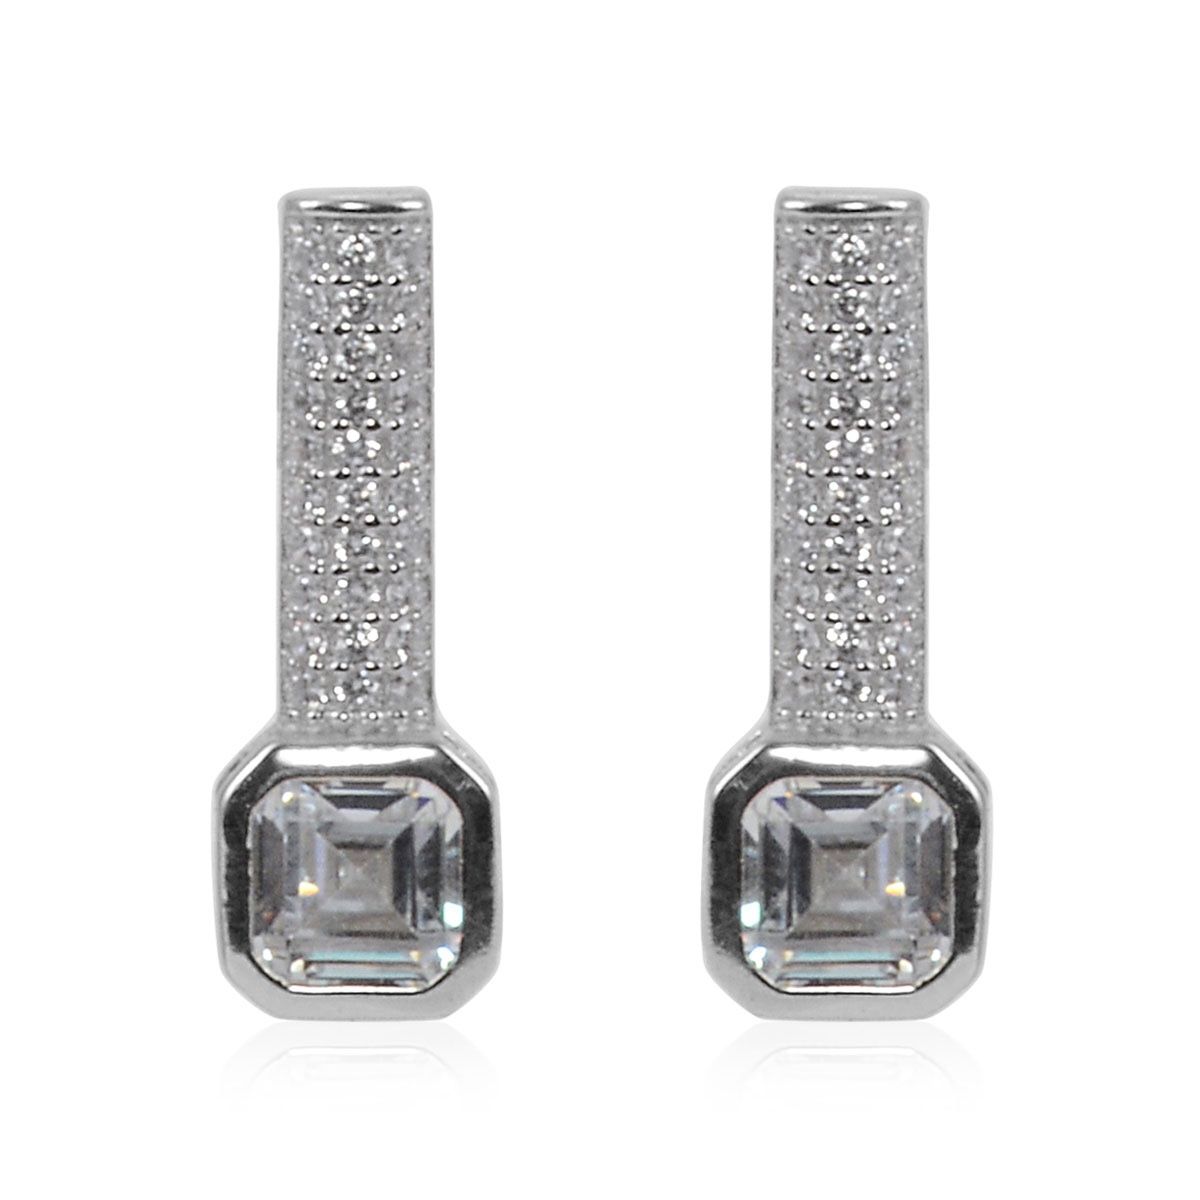 Simulated Diamond Earrings in Sterling Silver